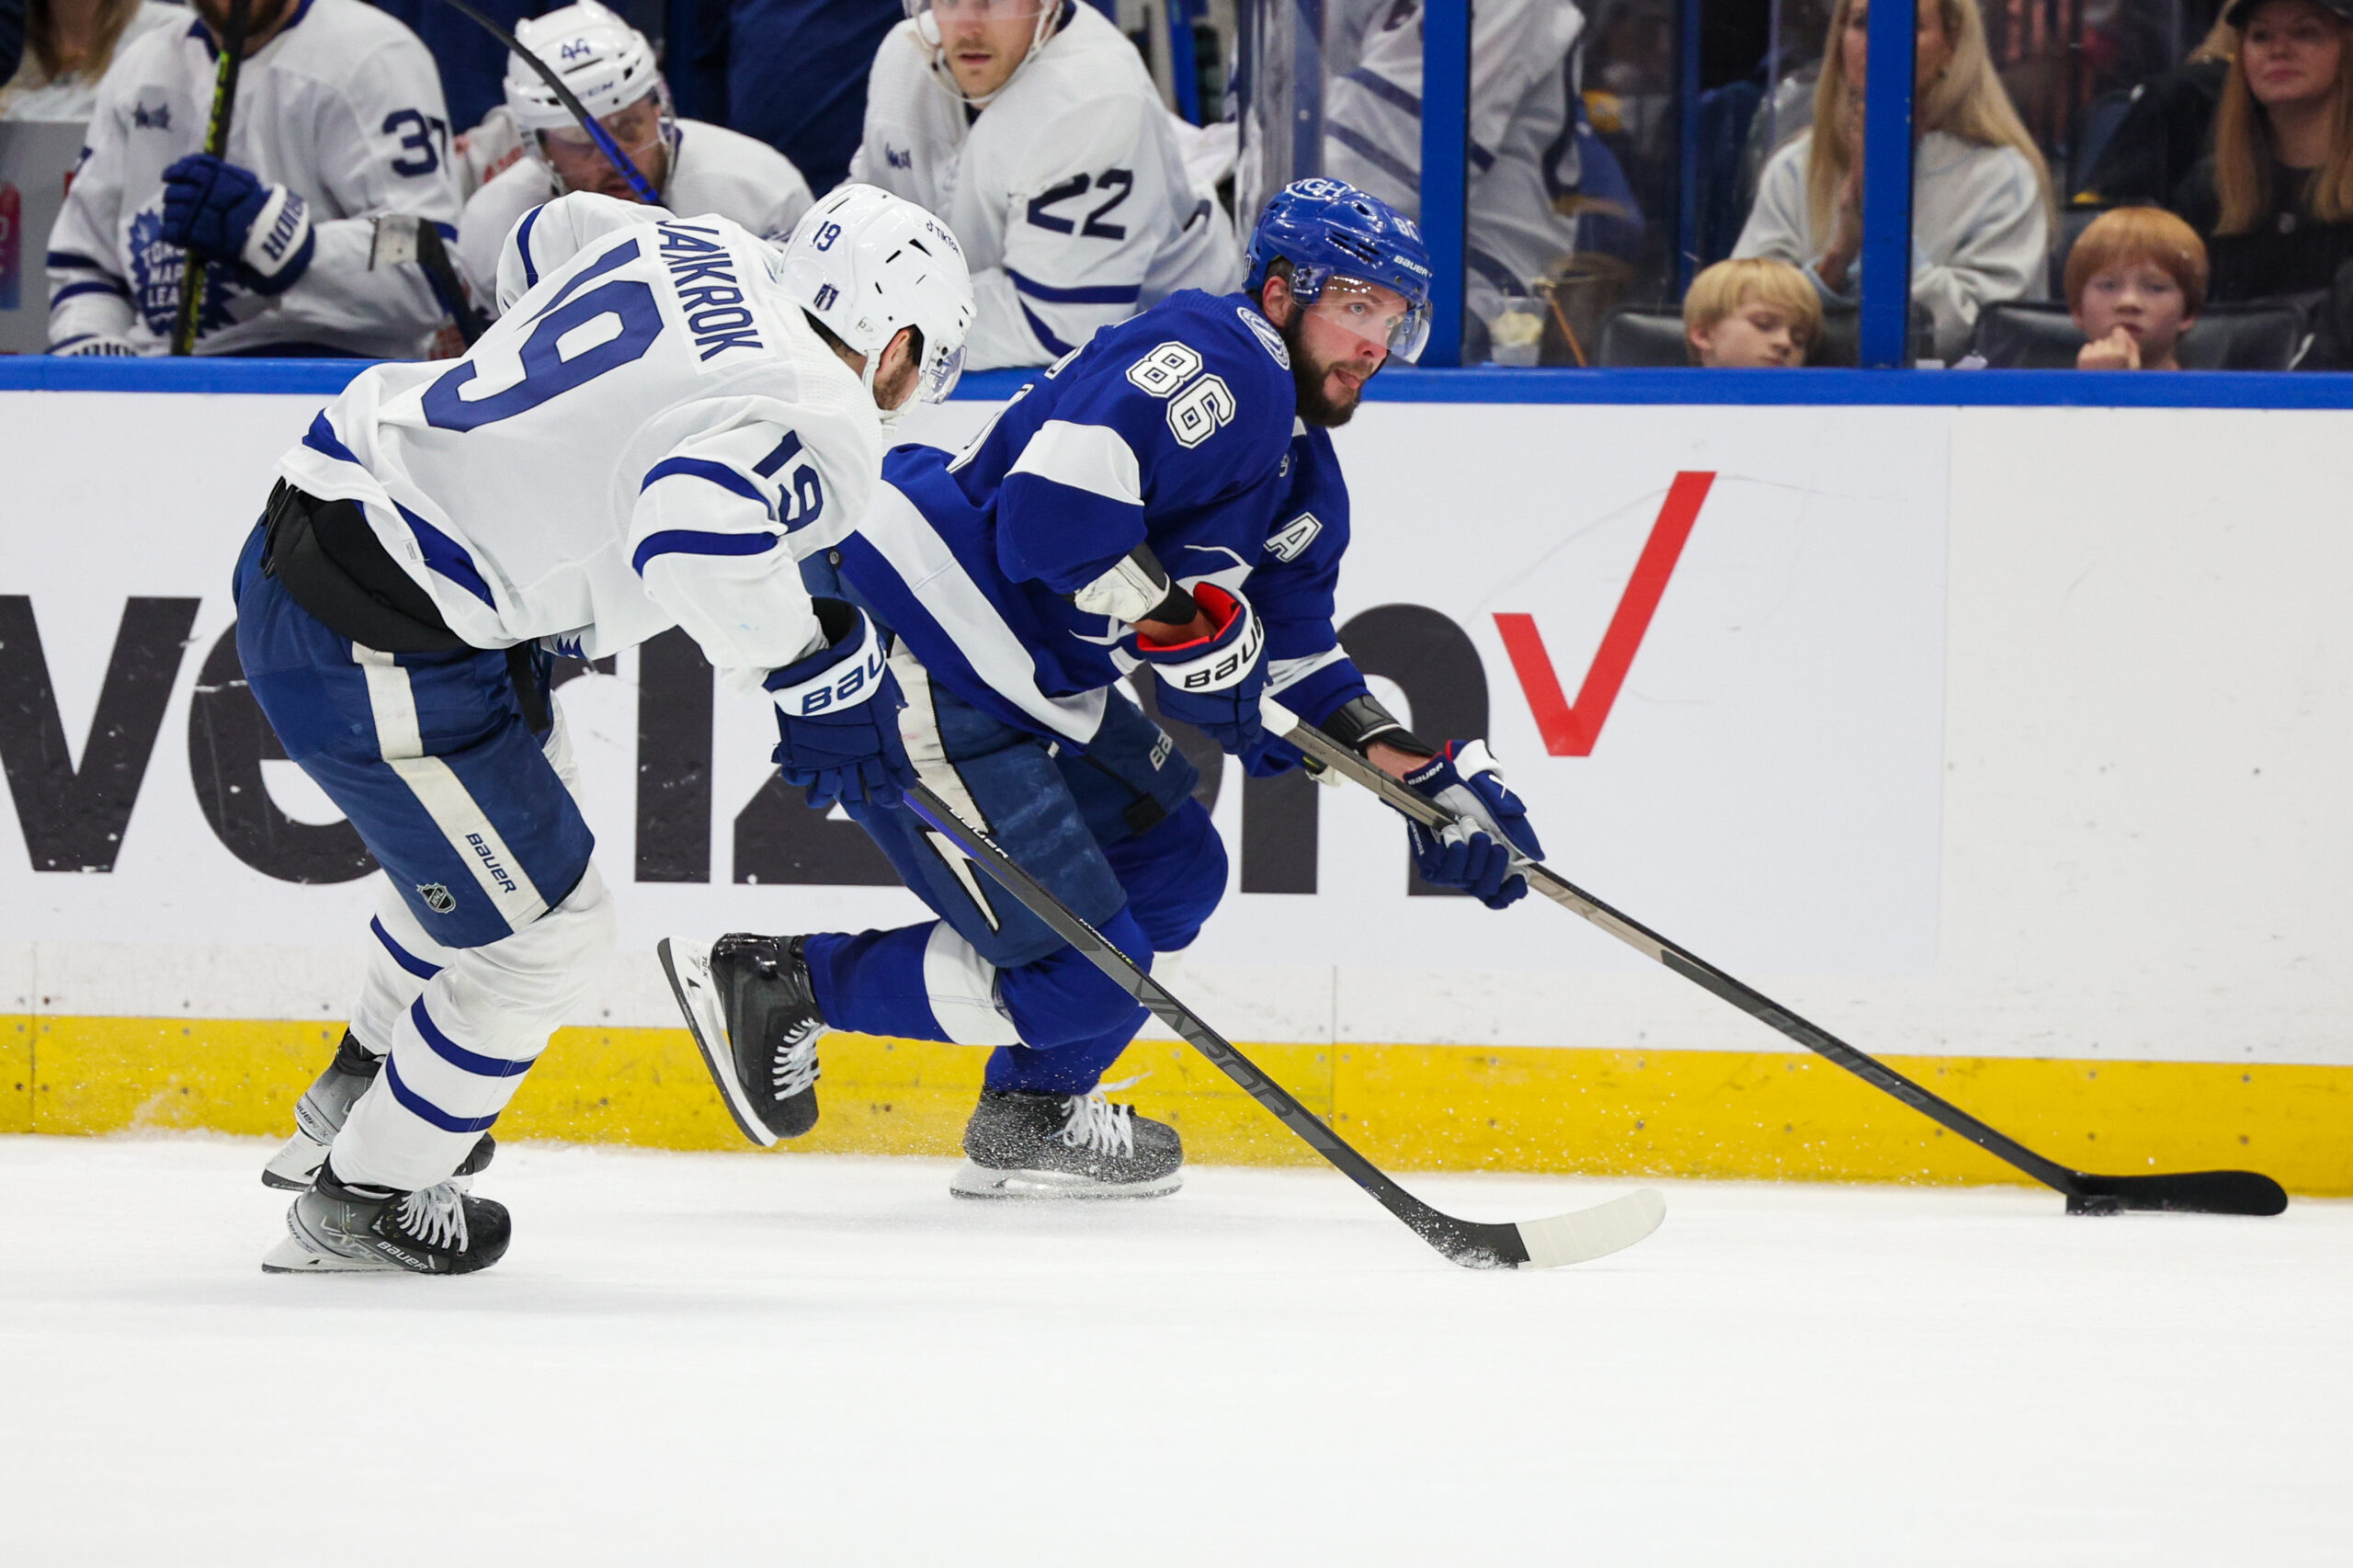 With Wins Difficult To Come By, Tampa Bay Lightning Seek To Build